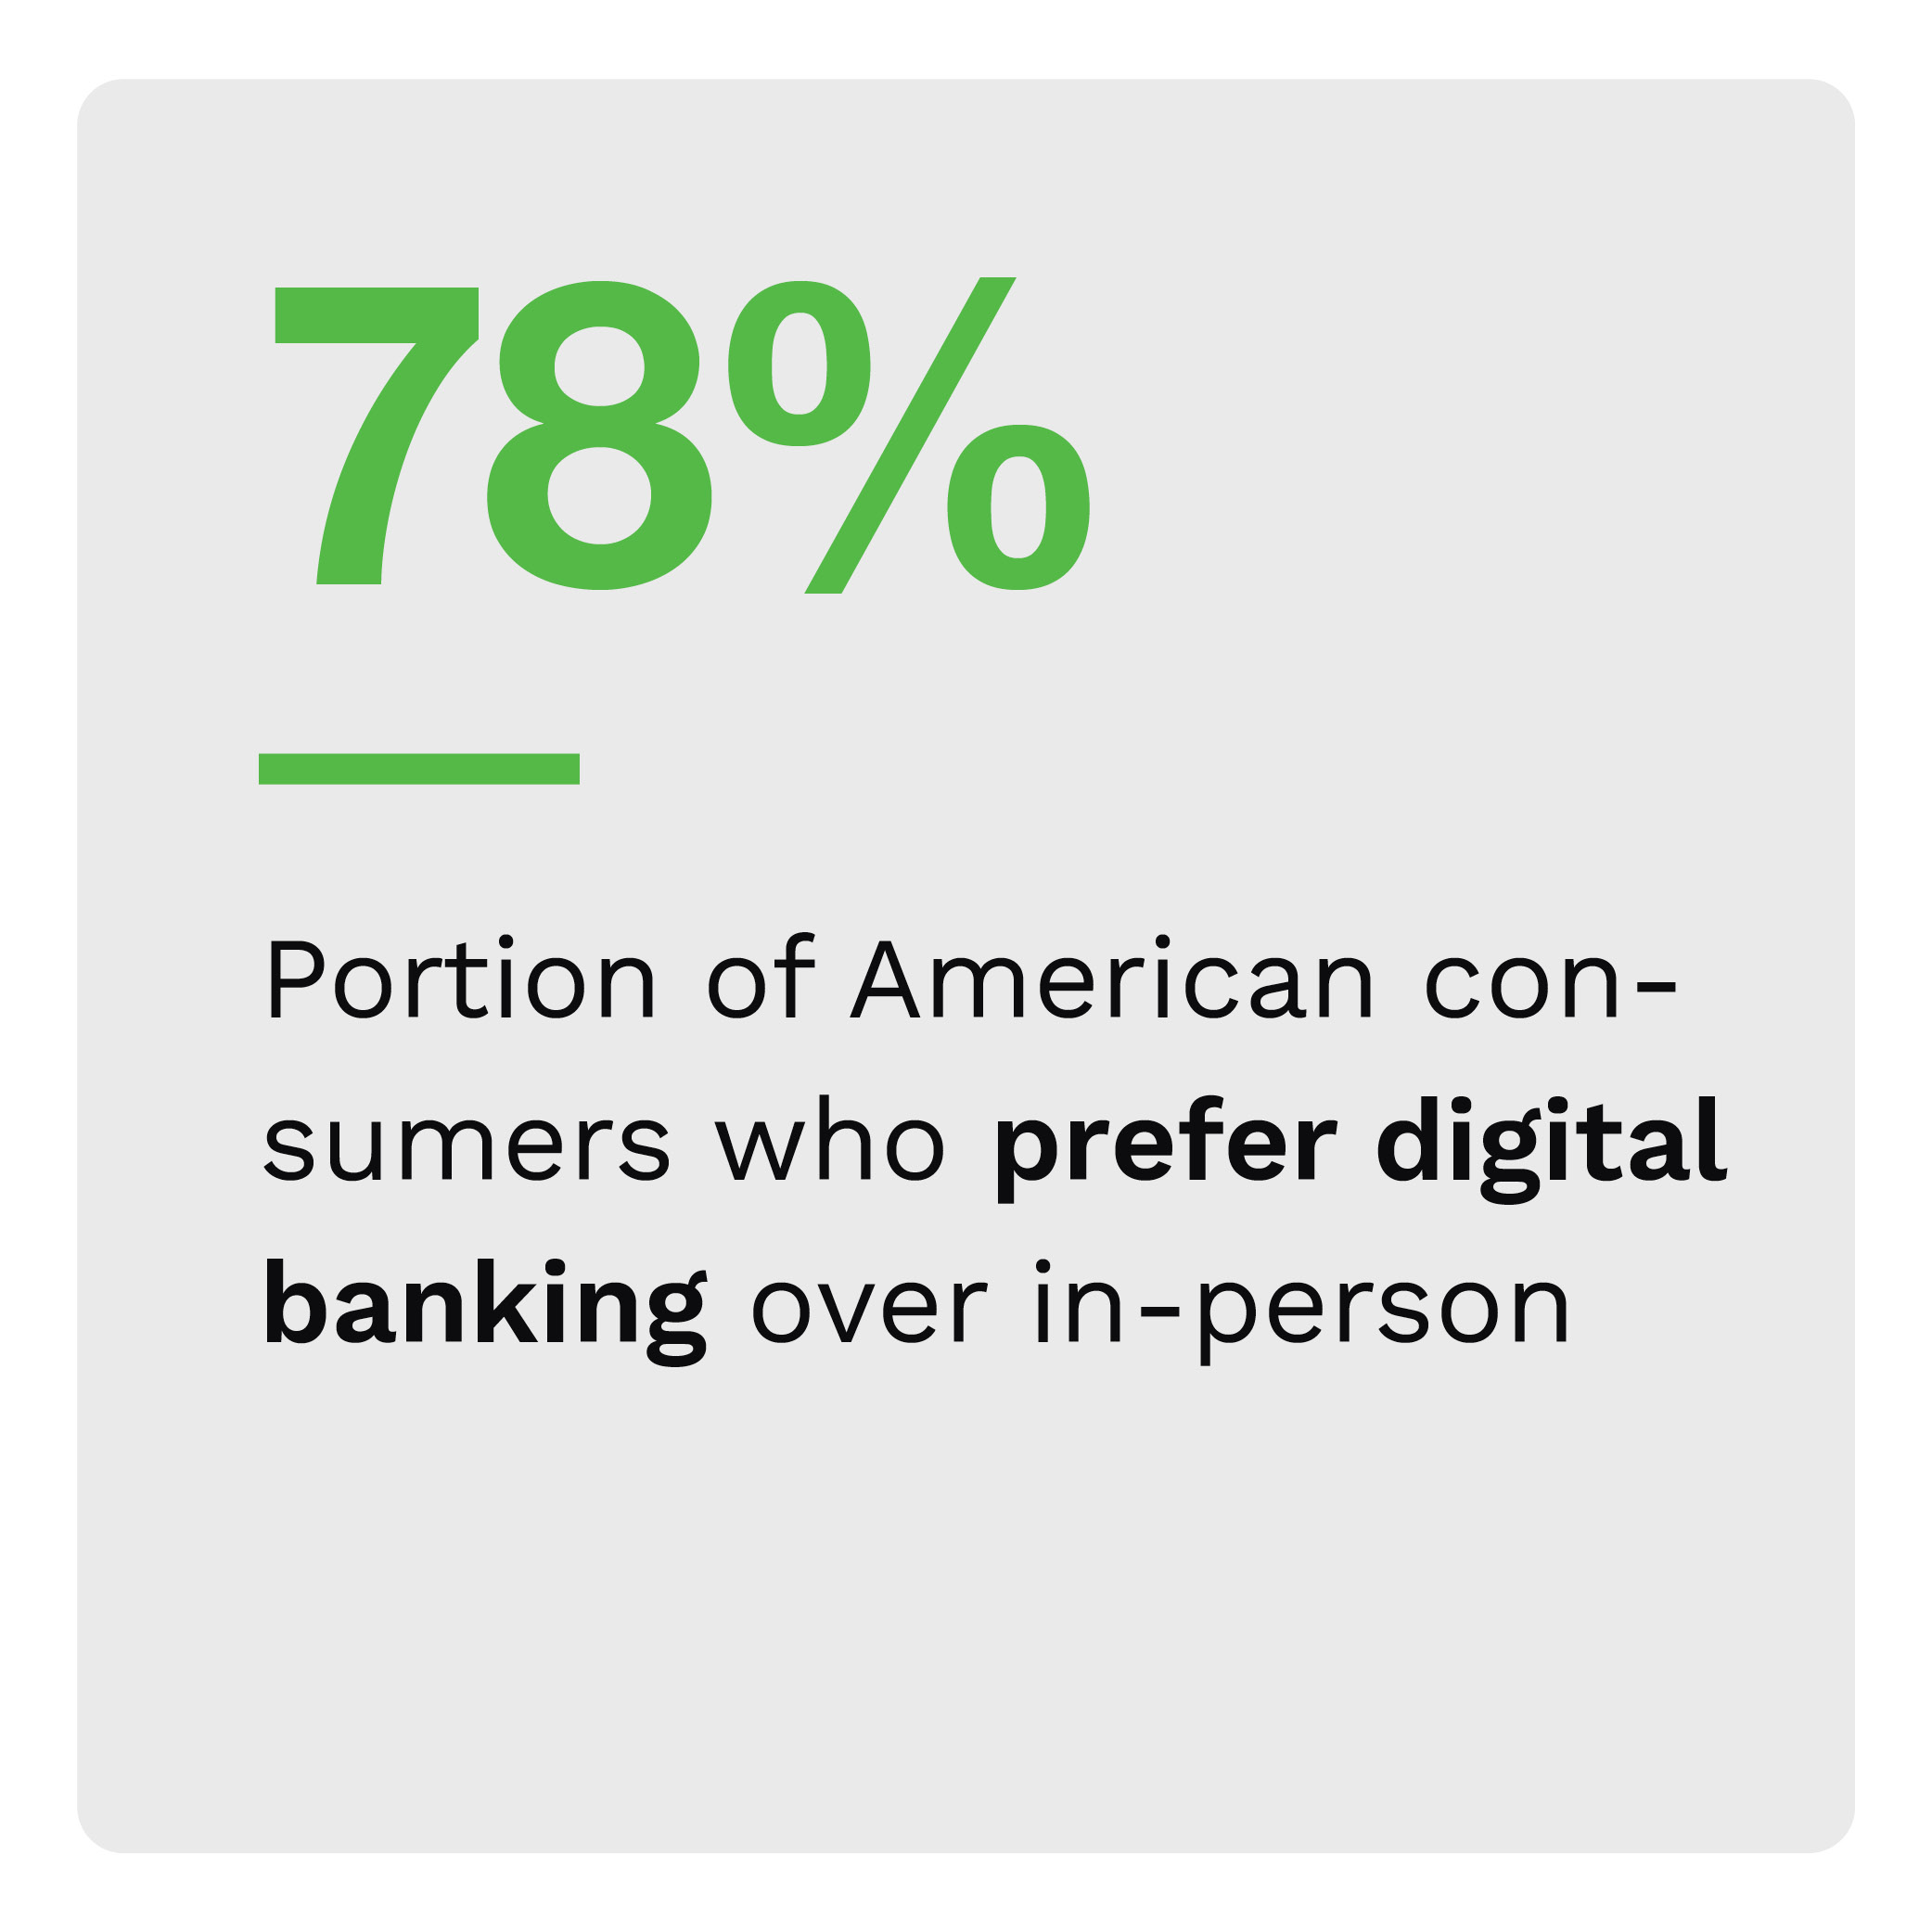 78%: Portion of American consumers who prefer digital banking over in-person